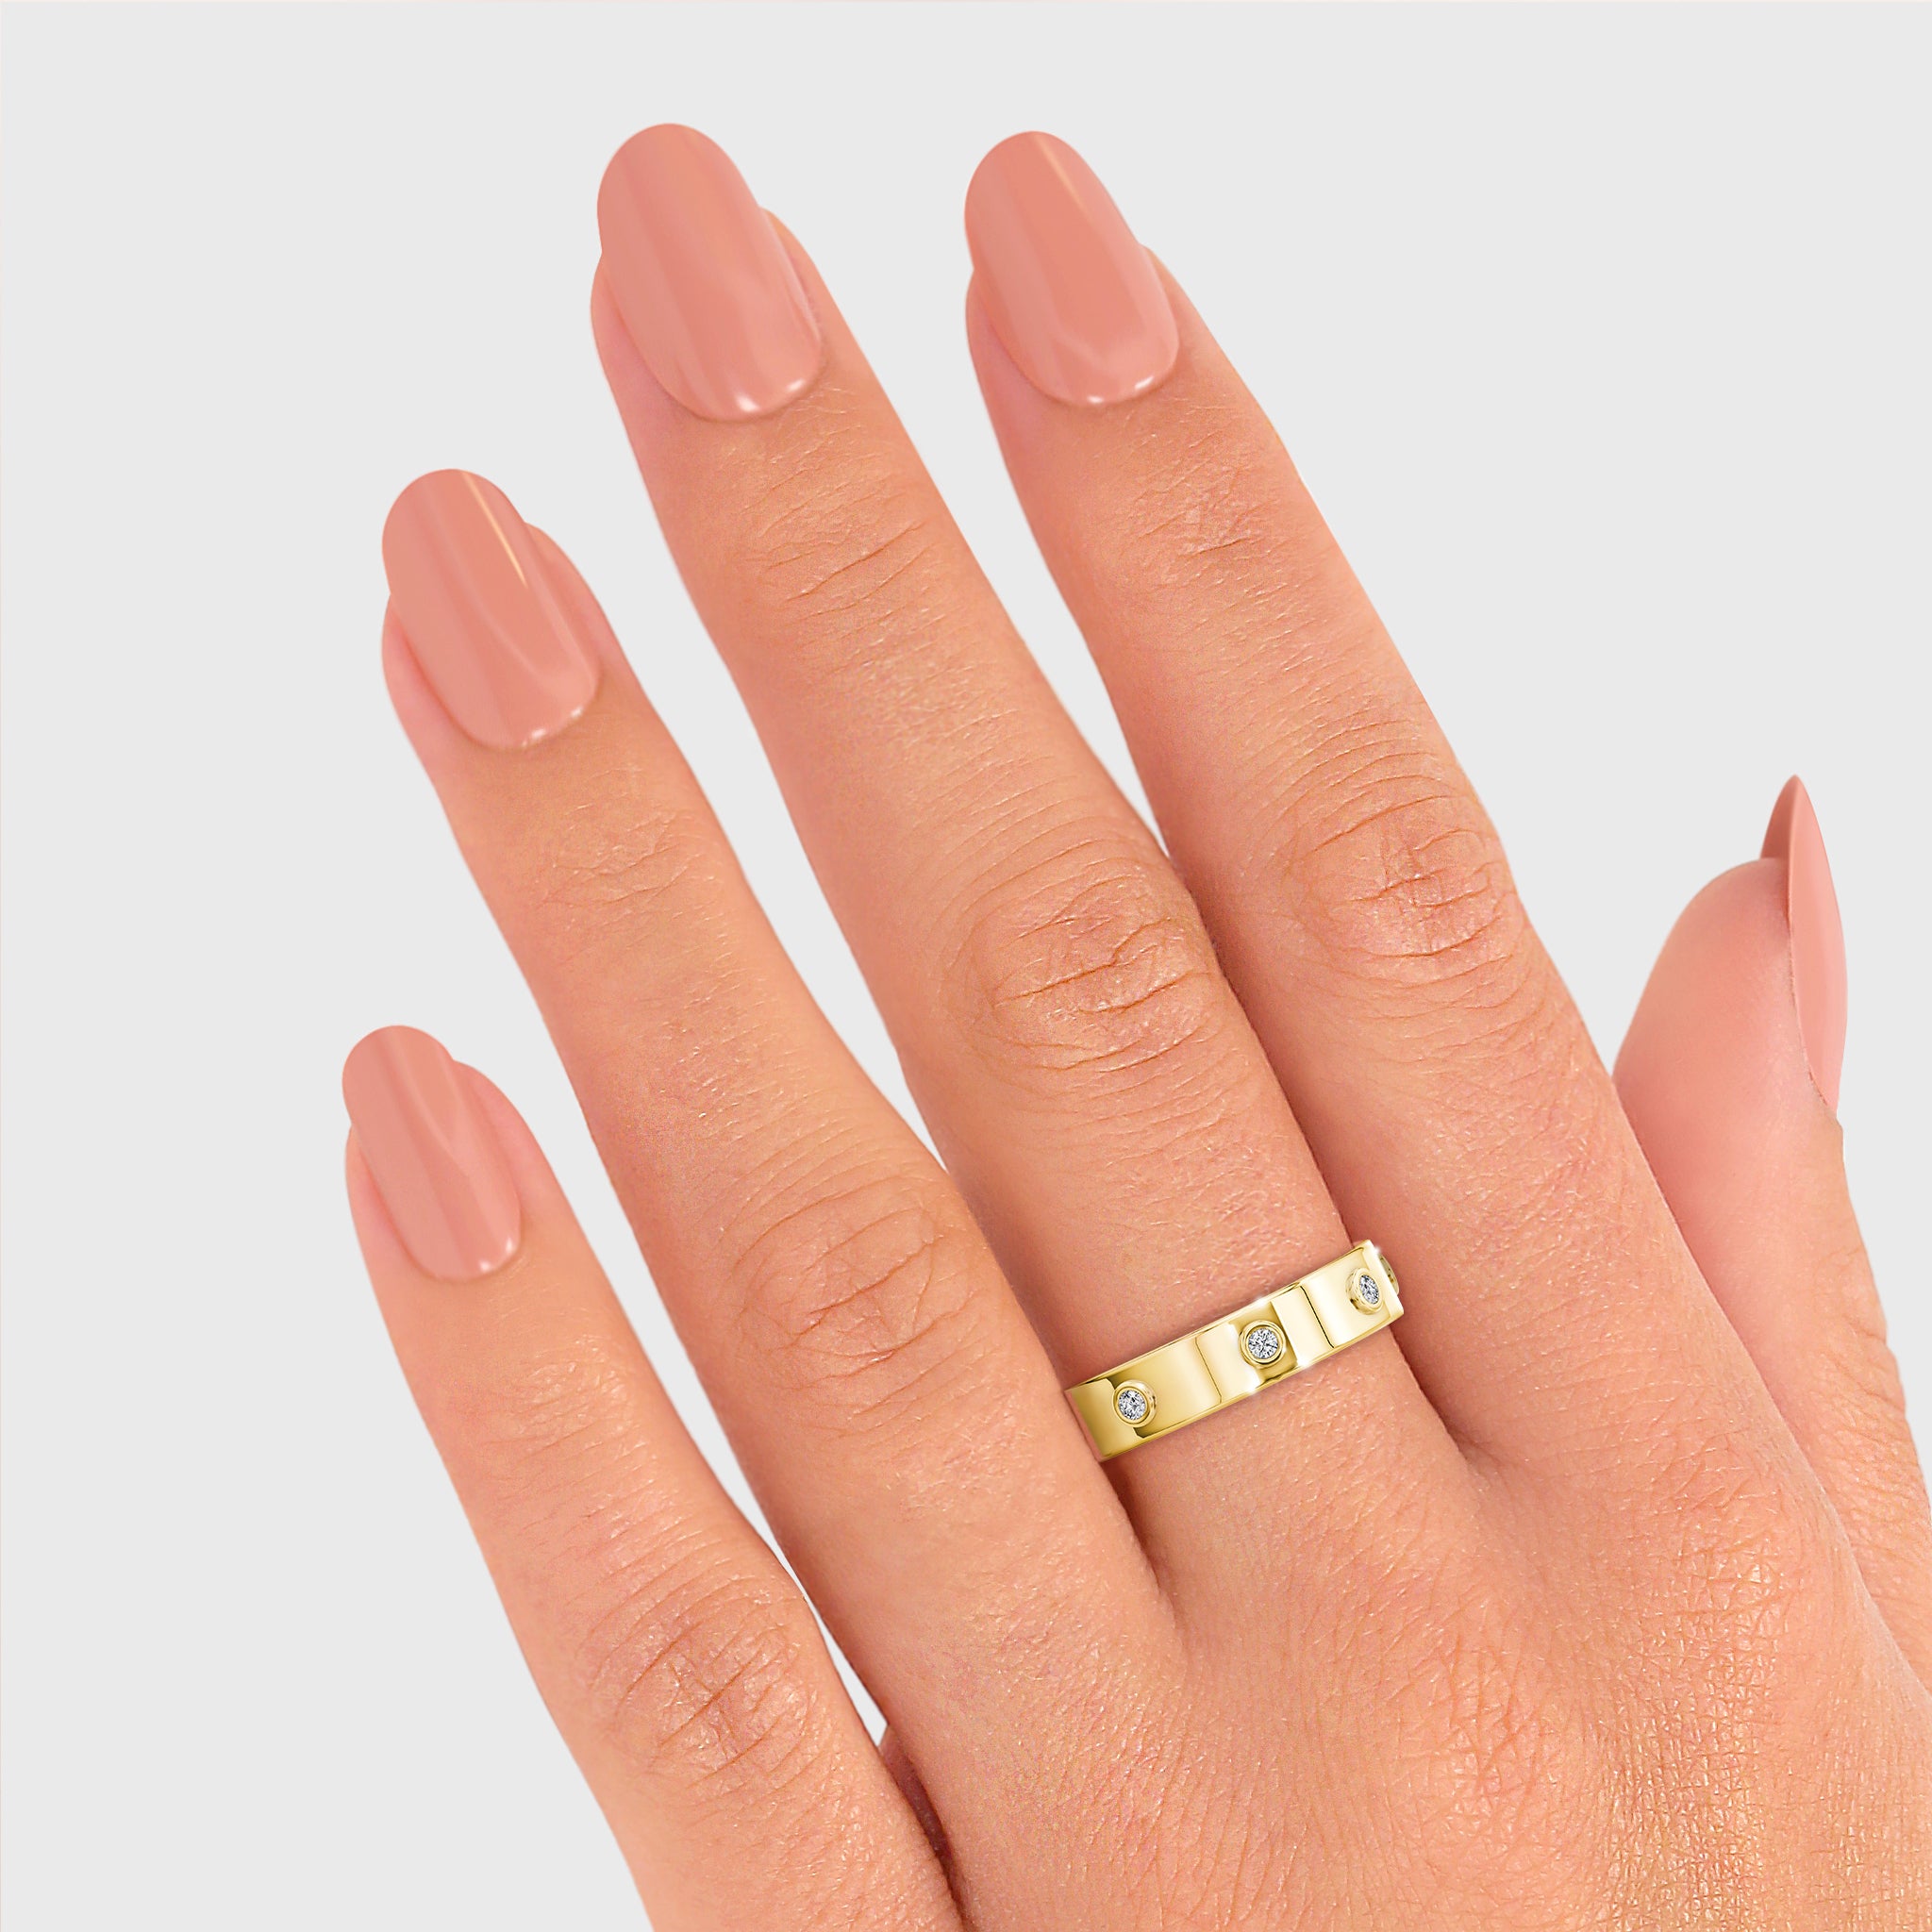 Shimansky - Women Wearing the Caesar Classic Diamond Ring 0.10ct crafted in 18K Yellow Gold